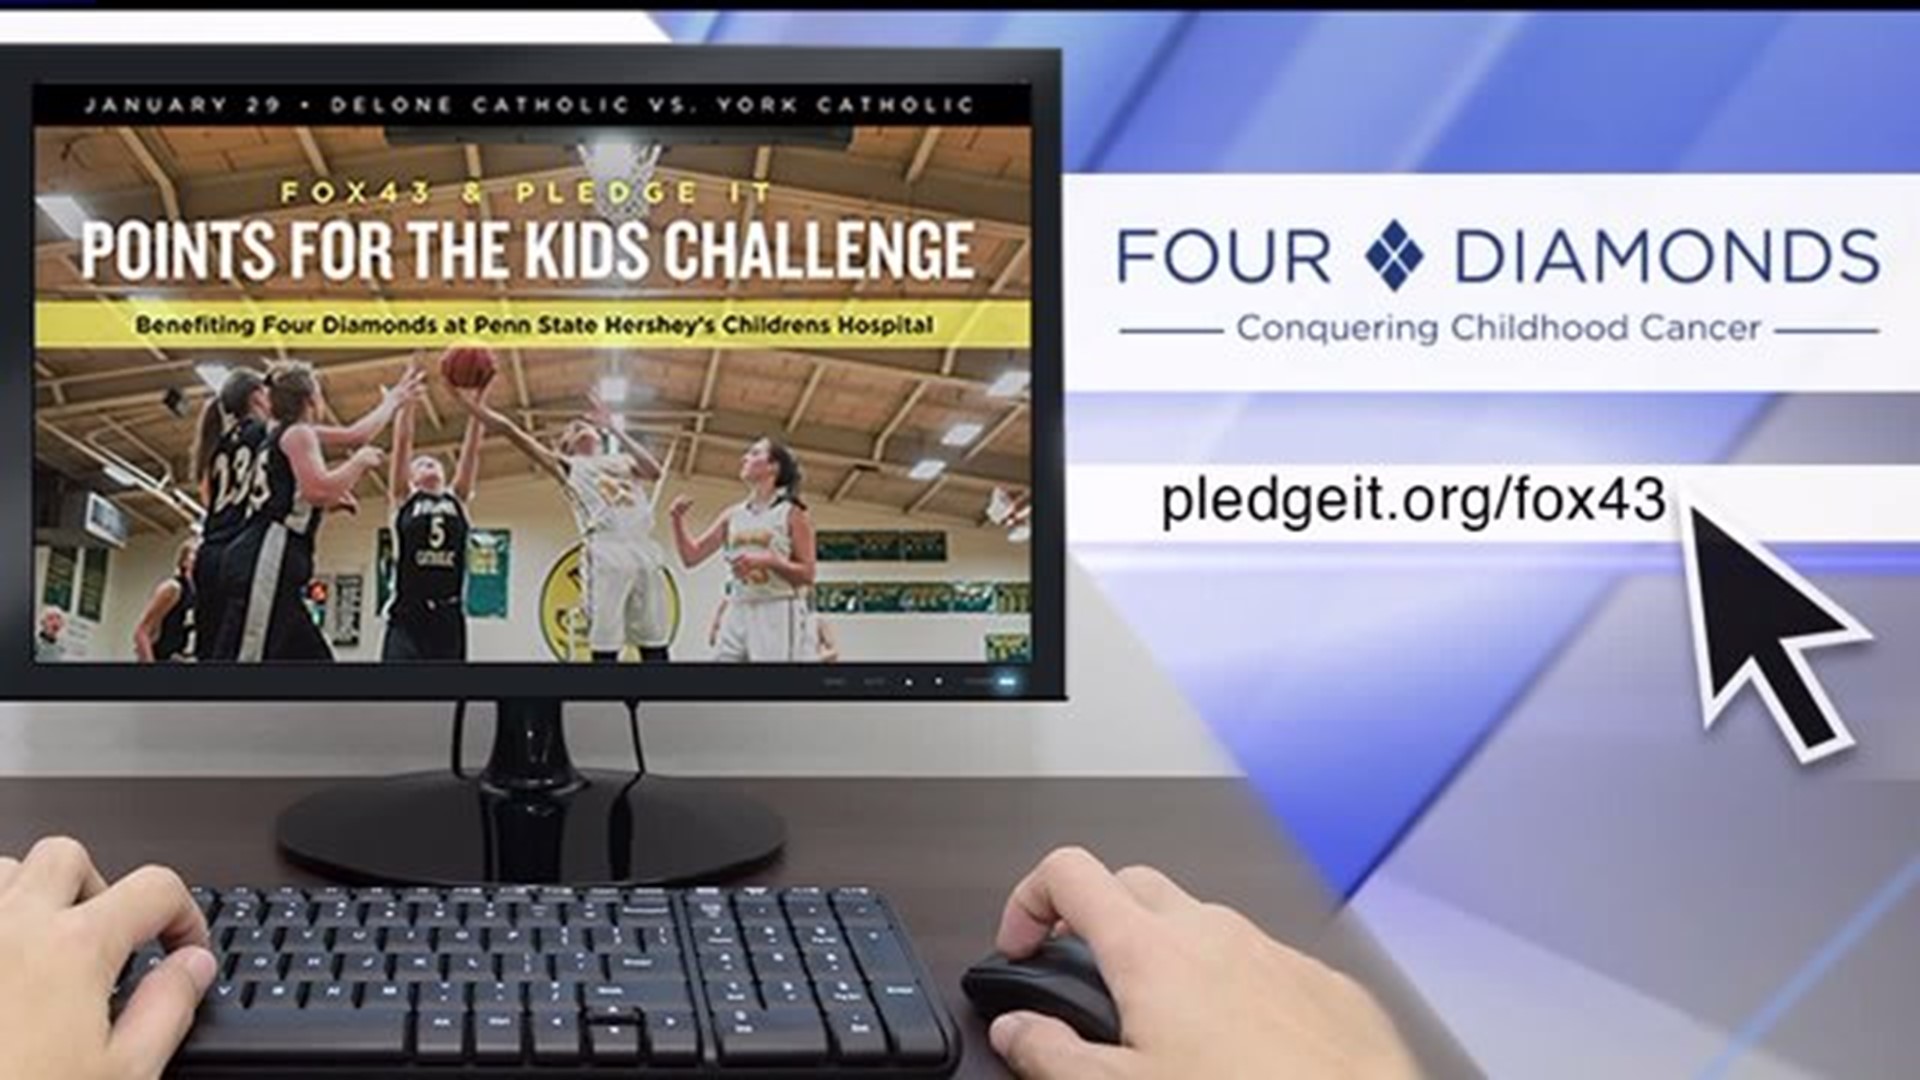 FOX43 and PLEDGE IT partner to launch rivalry game that will raise thousands of dollars